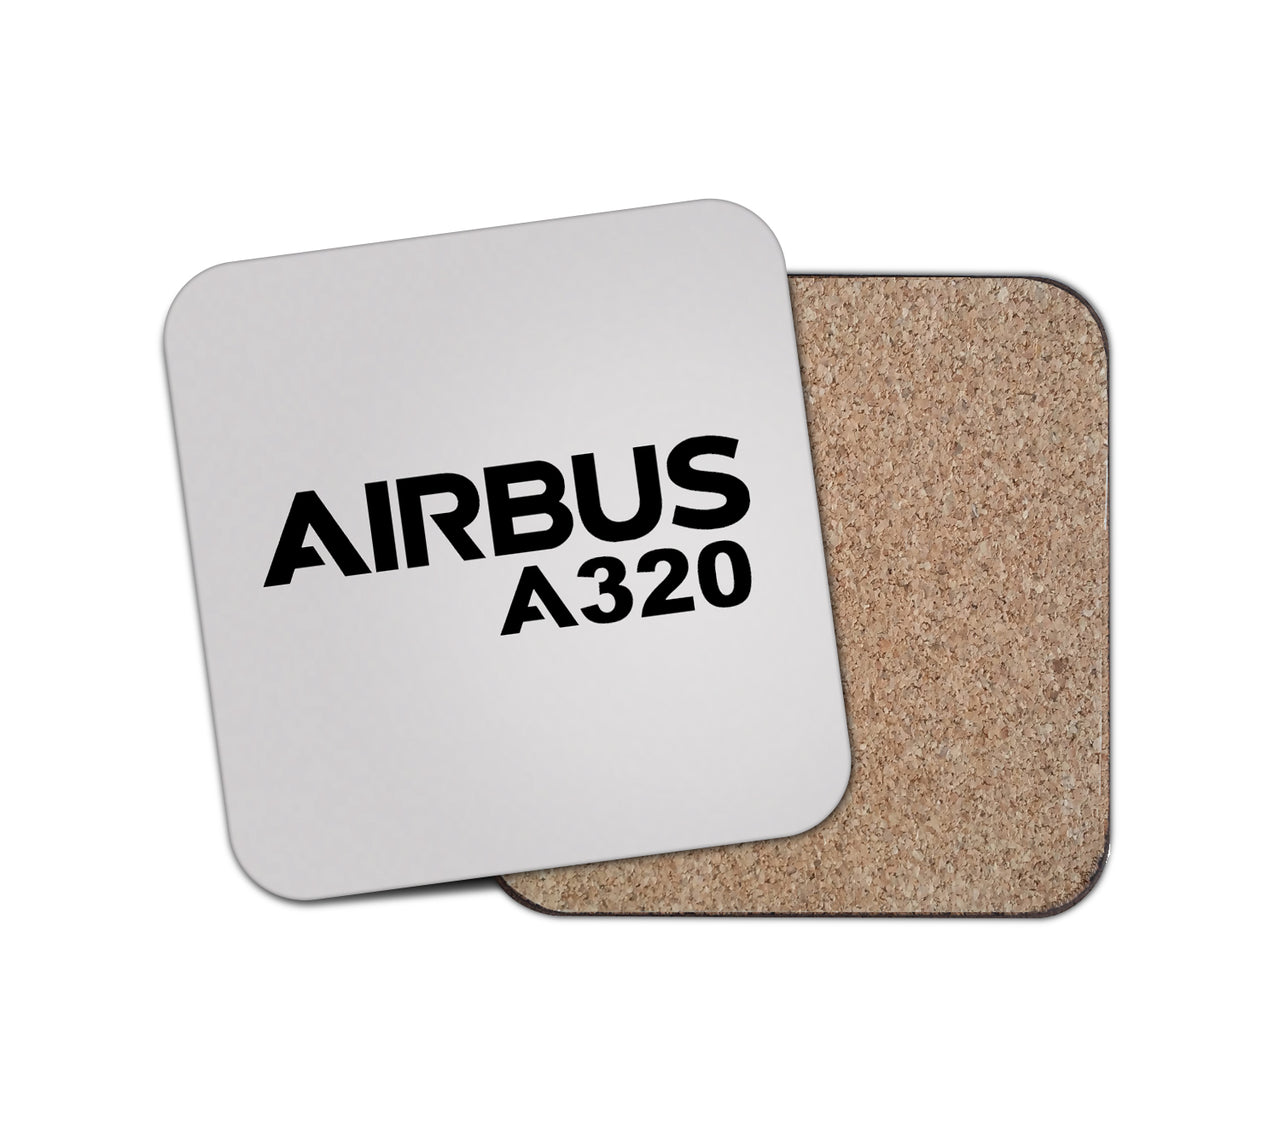 Airbus A320 & Text Designed Coasters